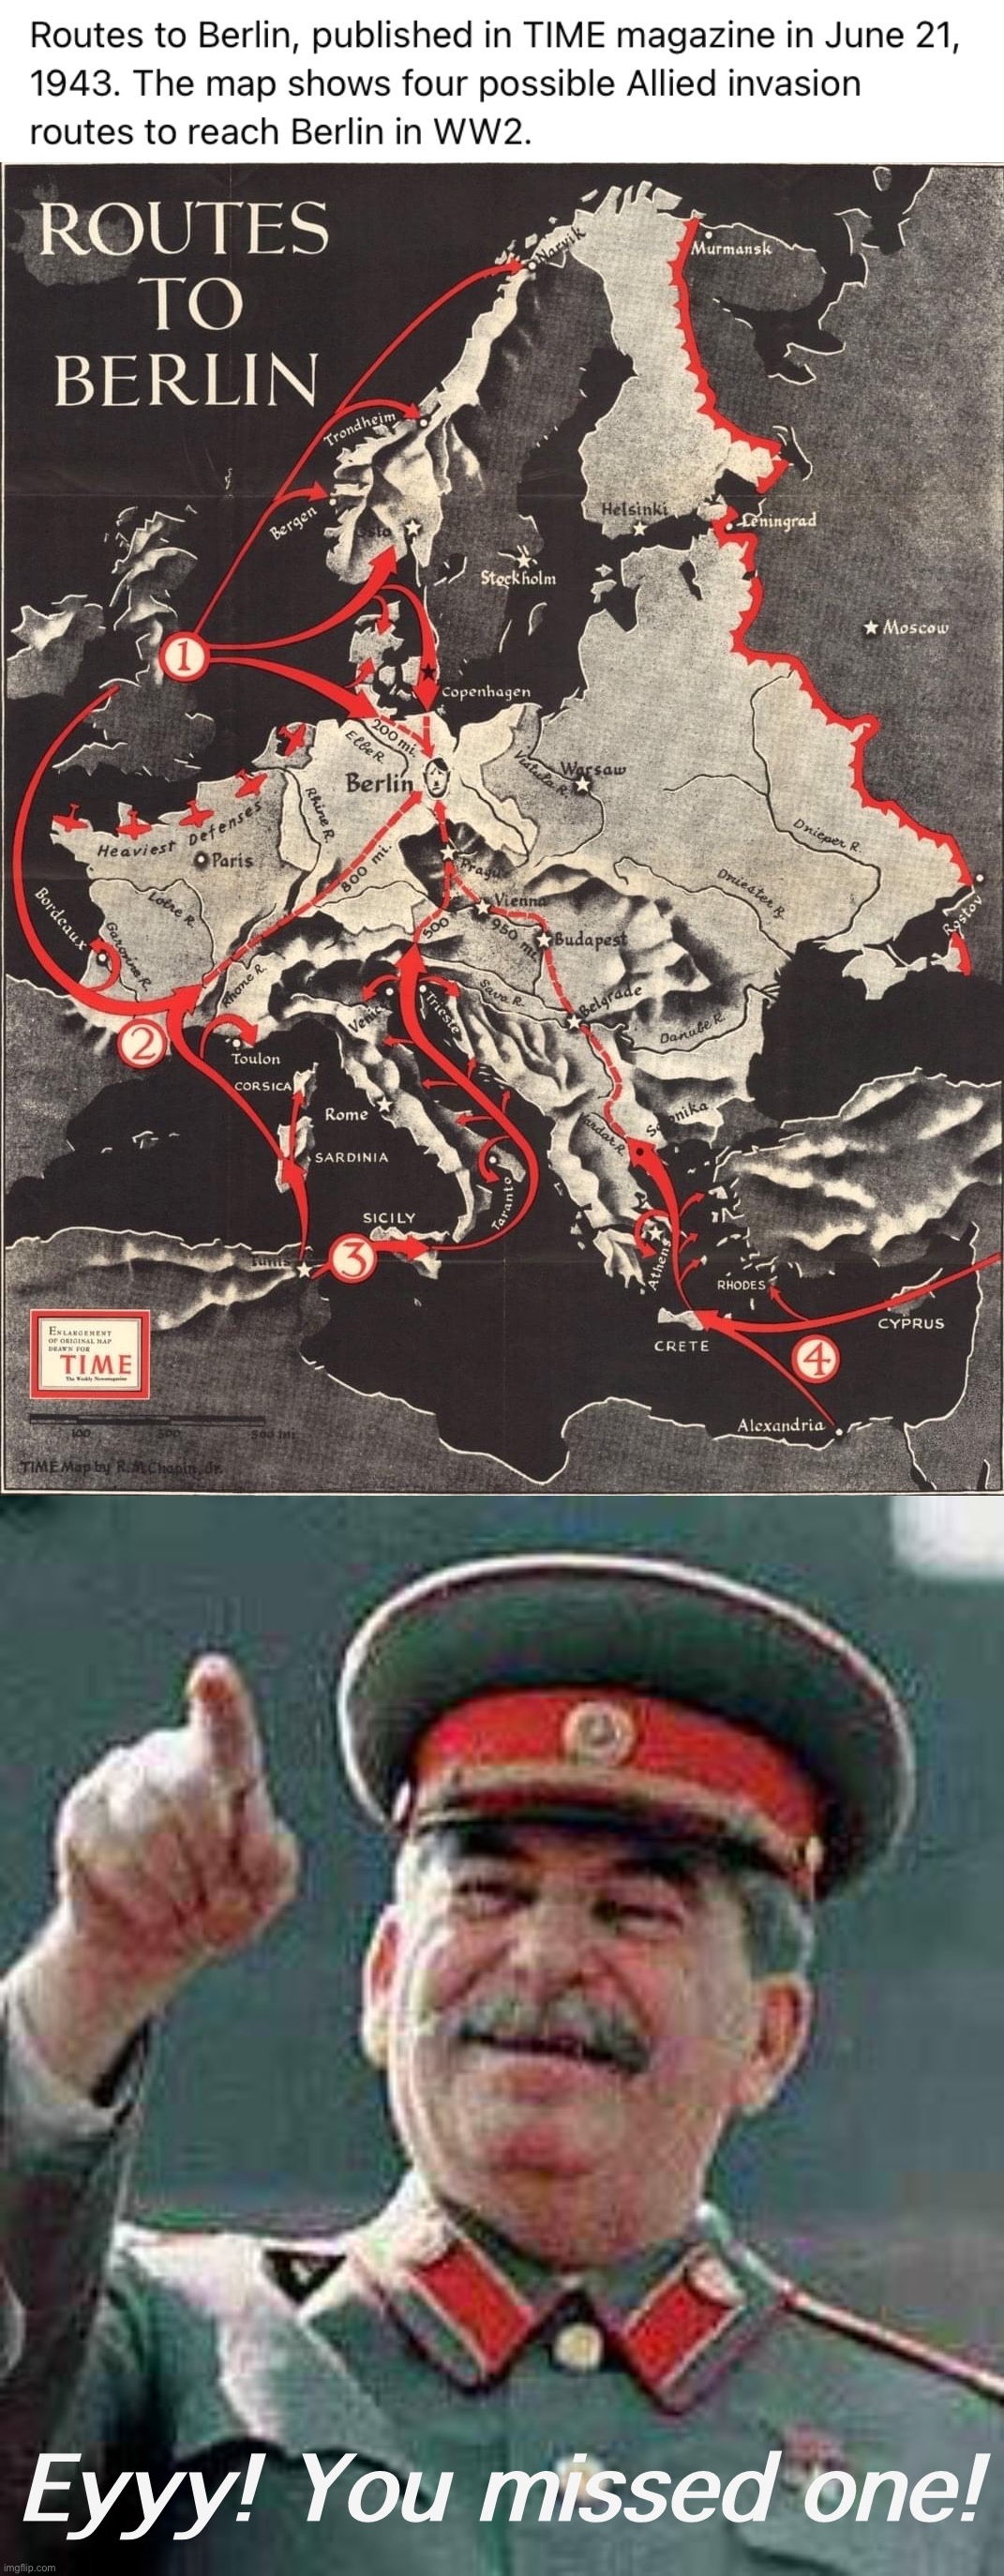 Conspicuously absent: The route from R u s s i a | Eyyy! You missed one! | image tagged in routes to berlin,stalin says,wwii,world war 2,world war ii,ww2 | made w/ Imgflip meme maker